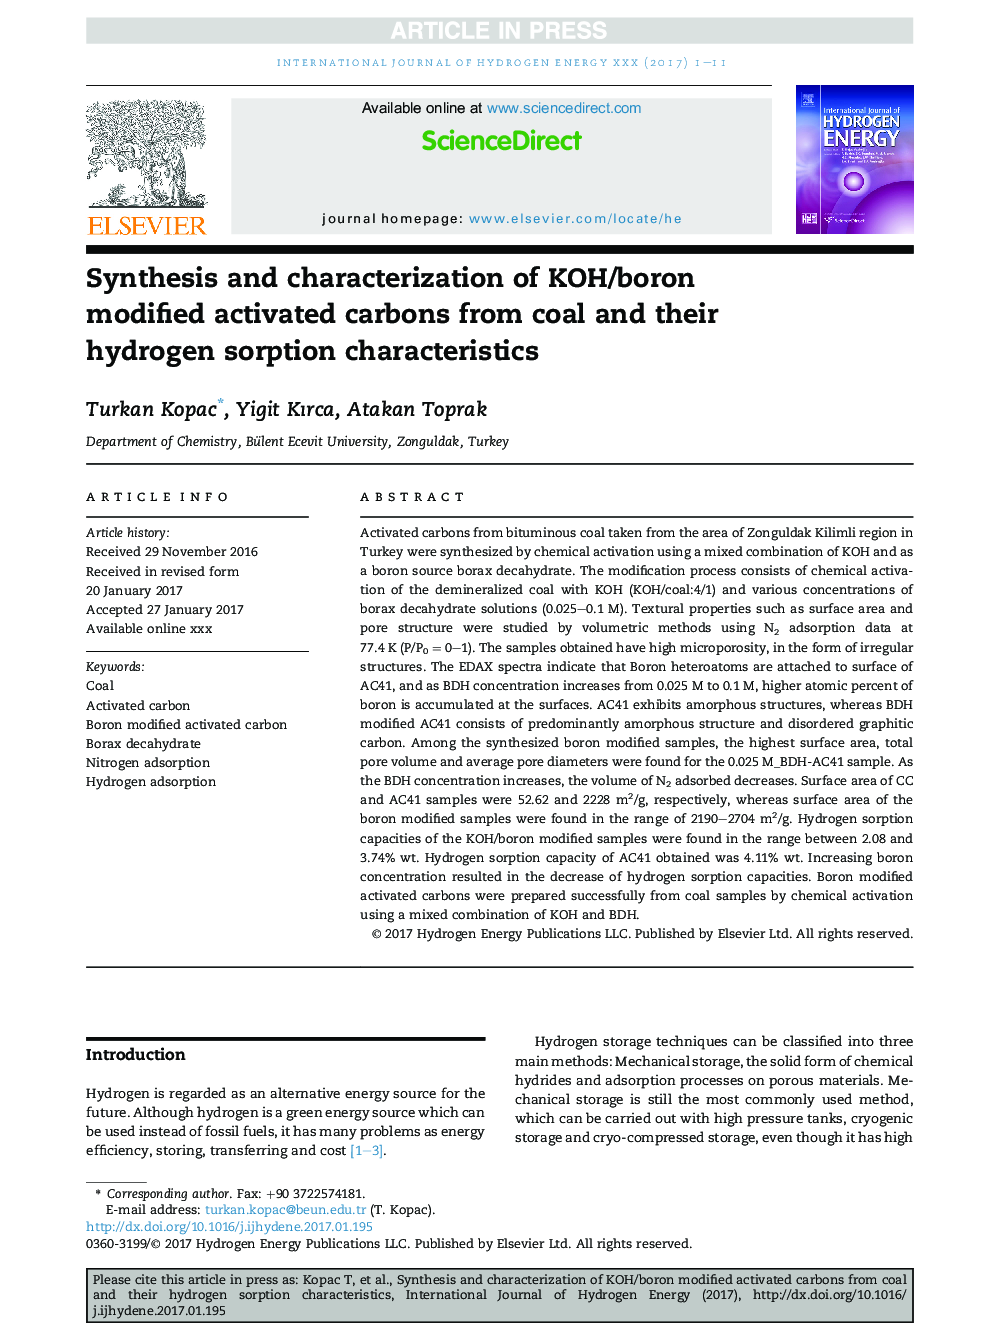 Synthesis and characterization of KOH/boron modified activated carbons from coal and their hydrogen sorption characteristics